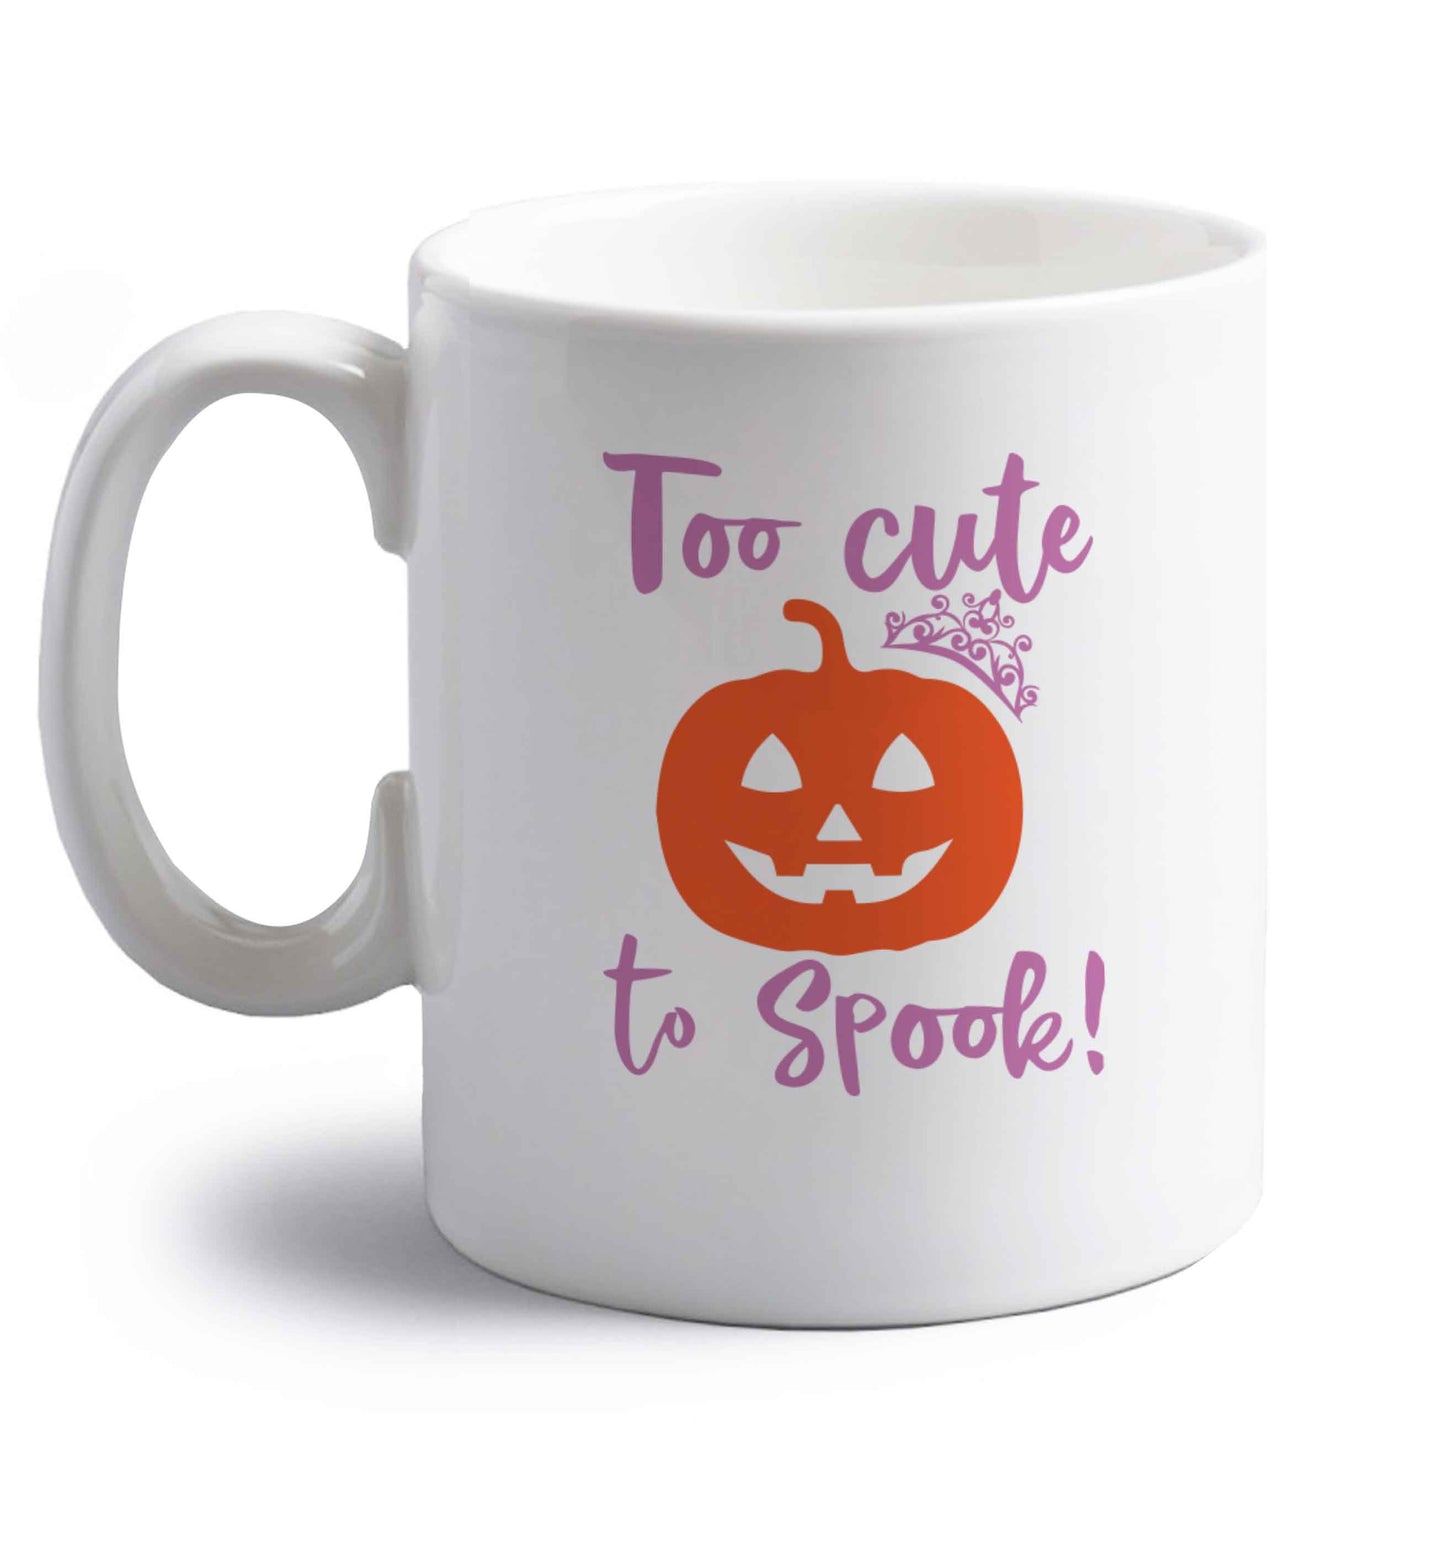 Too cute to spook! right handed white ceramic mug 